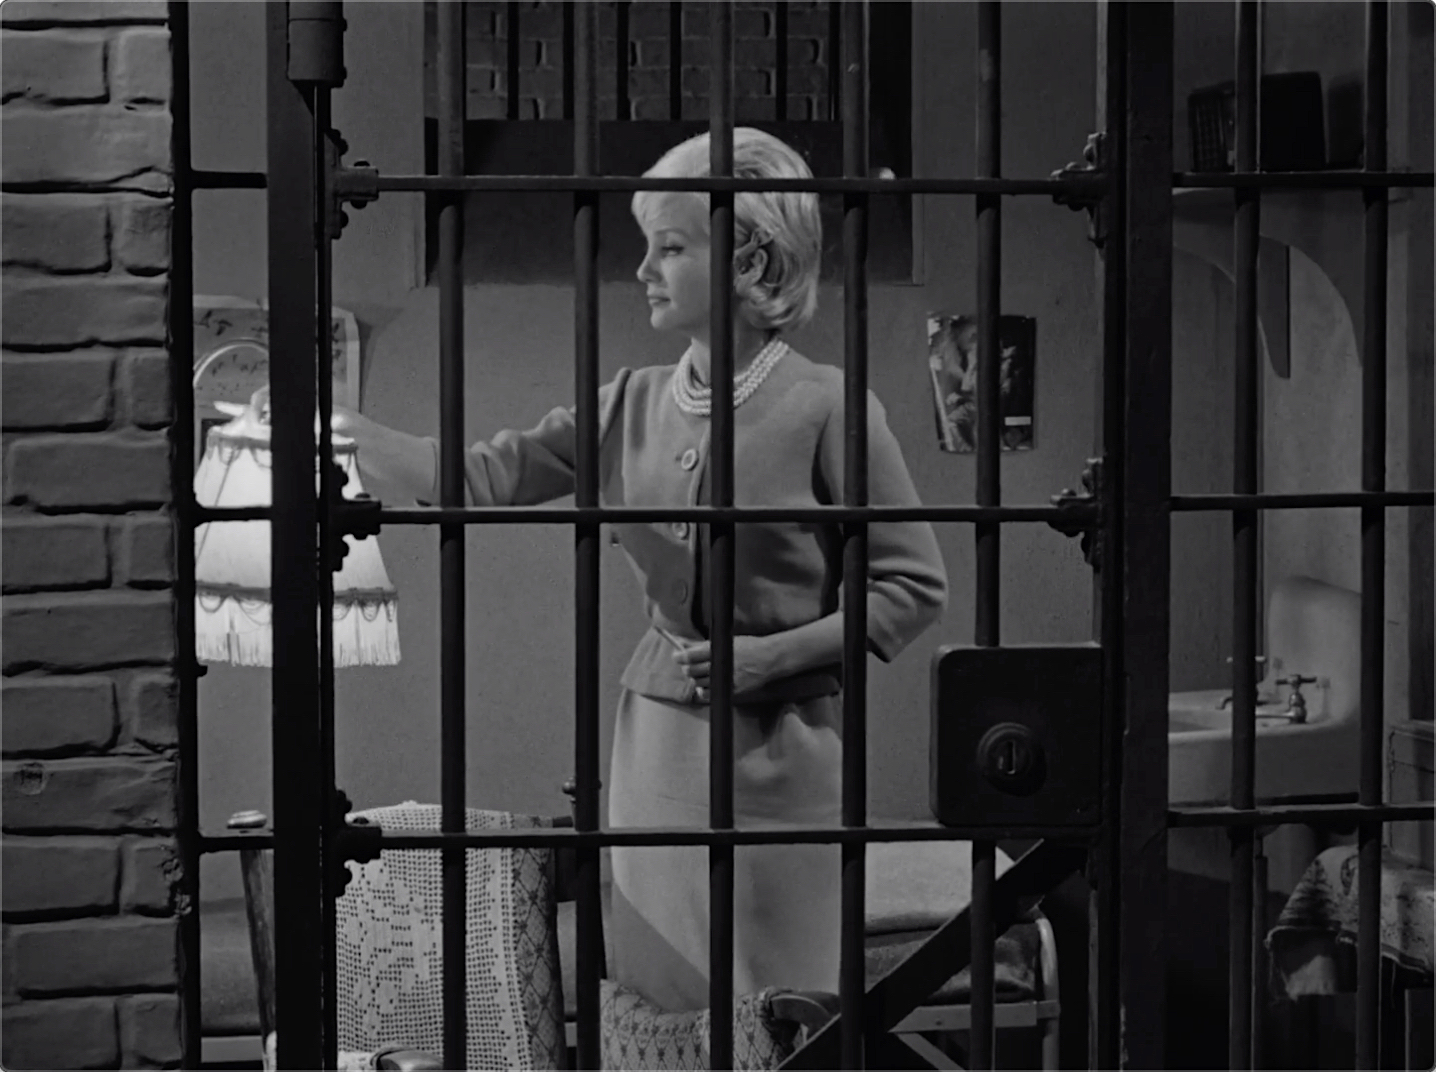 the-andy-griffith-show-s04e18-prisoner-of-love-feb-10-1964-53-jpg.185728